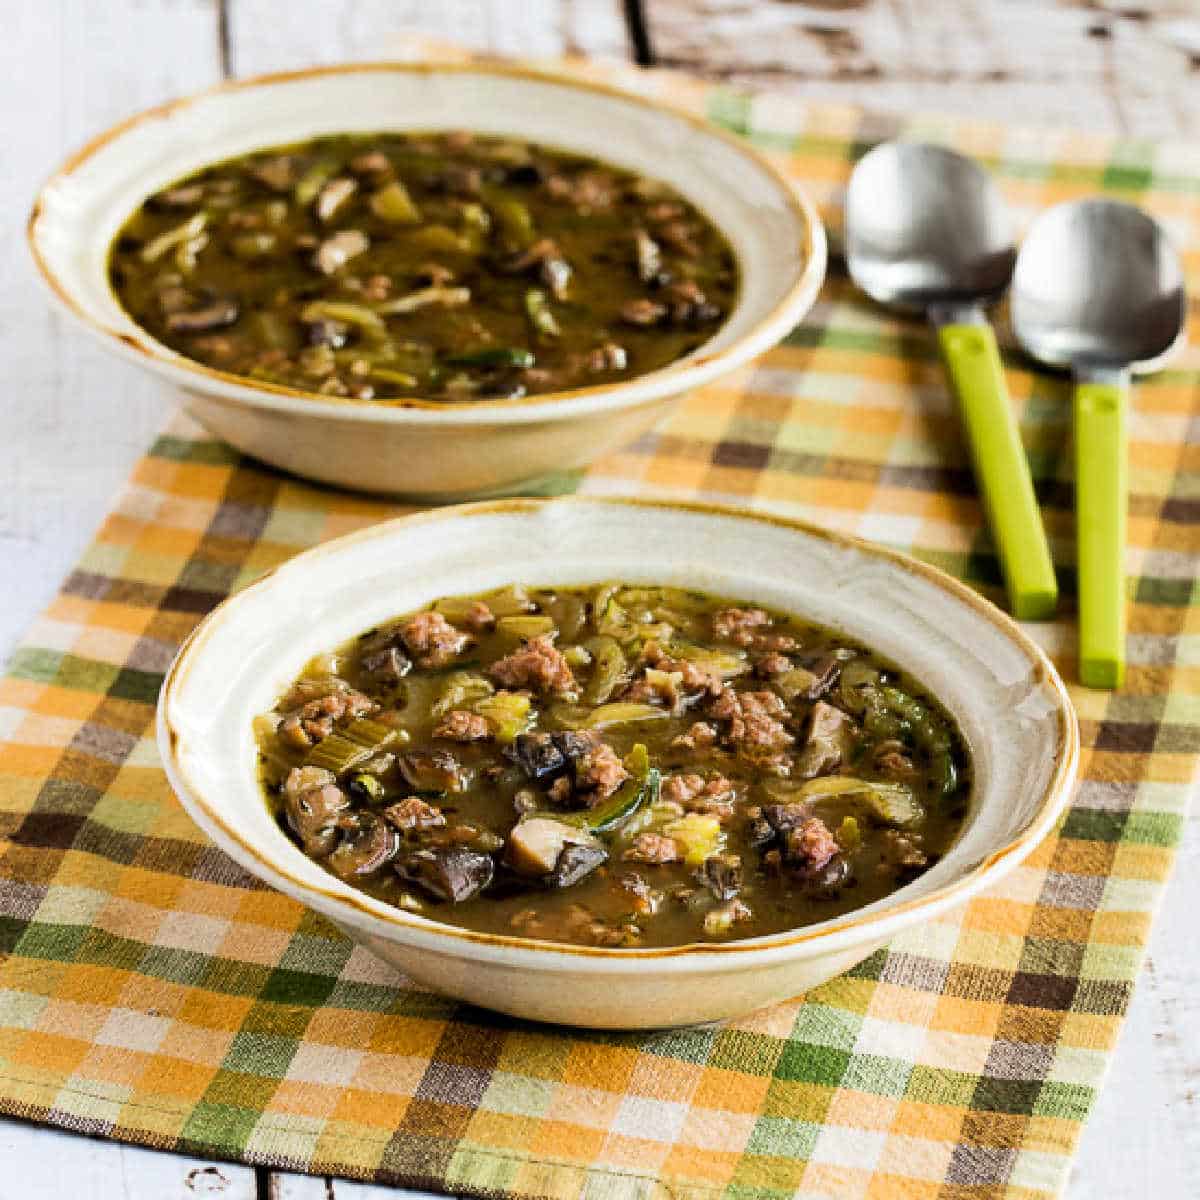 Square image for Turkey Mushroom Soup with Zucchini Noodles shown in two bowls with spoons.